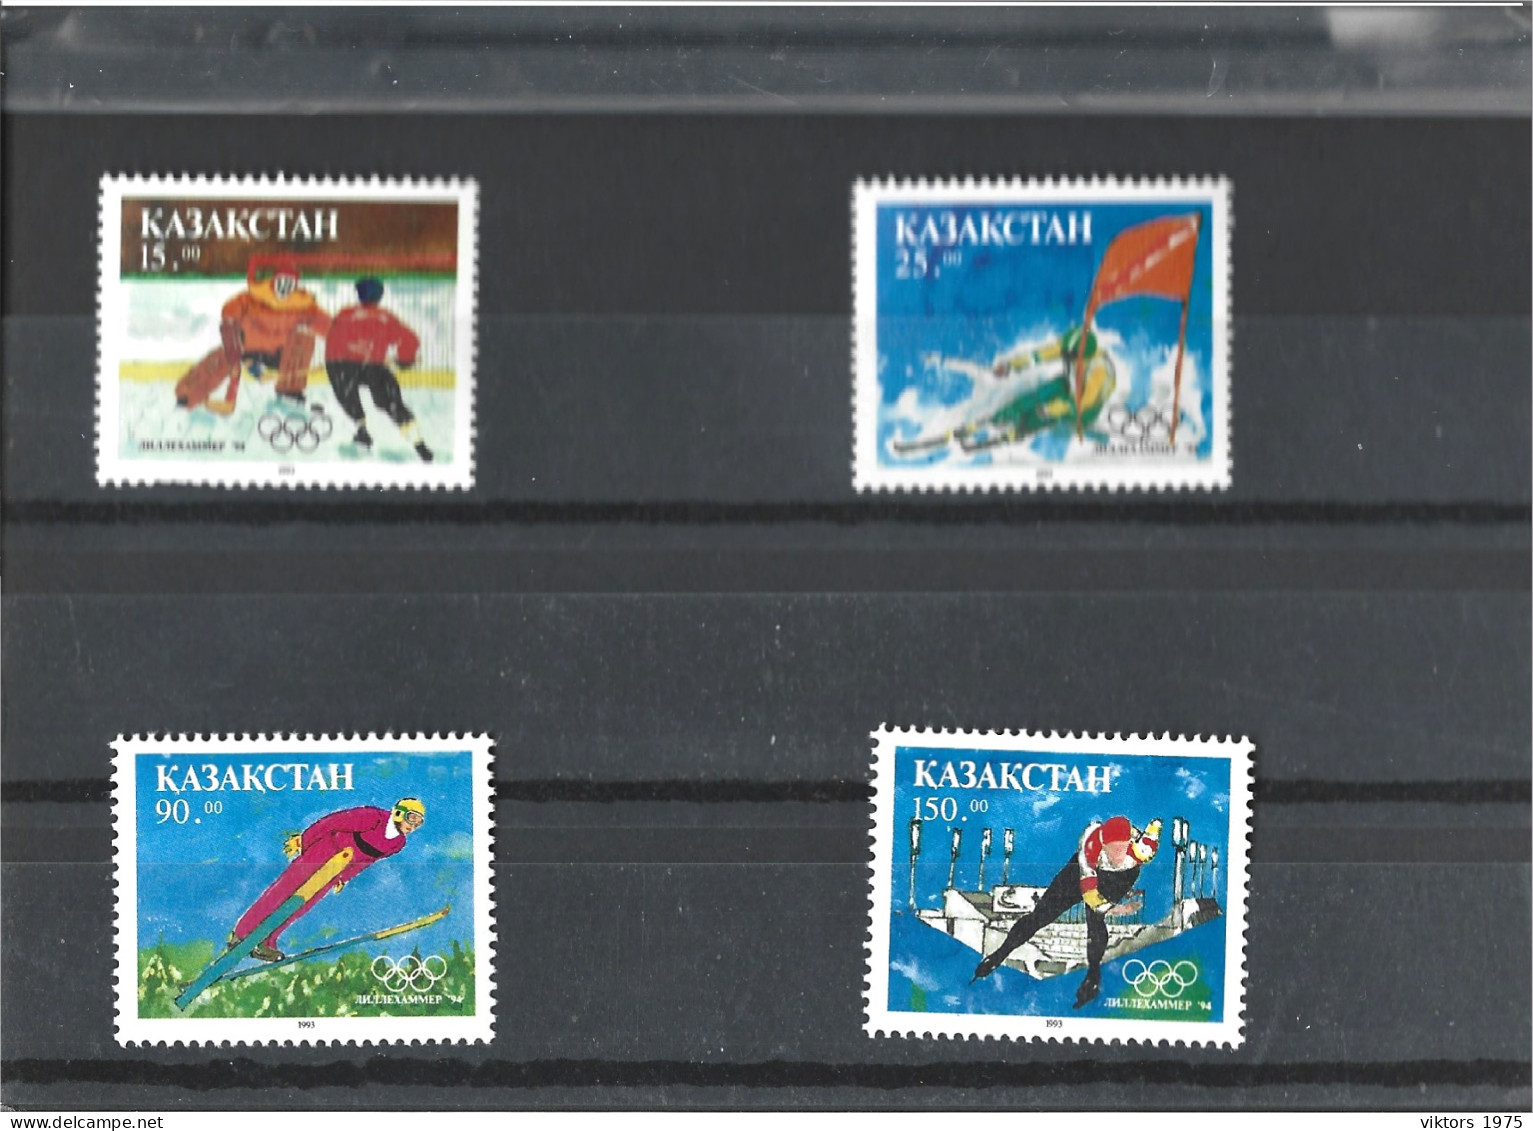 MNH Stamps Nr.37-40 In MICHEL Catalog - Kasachstan